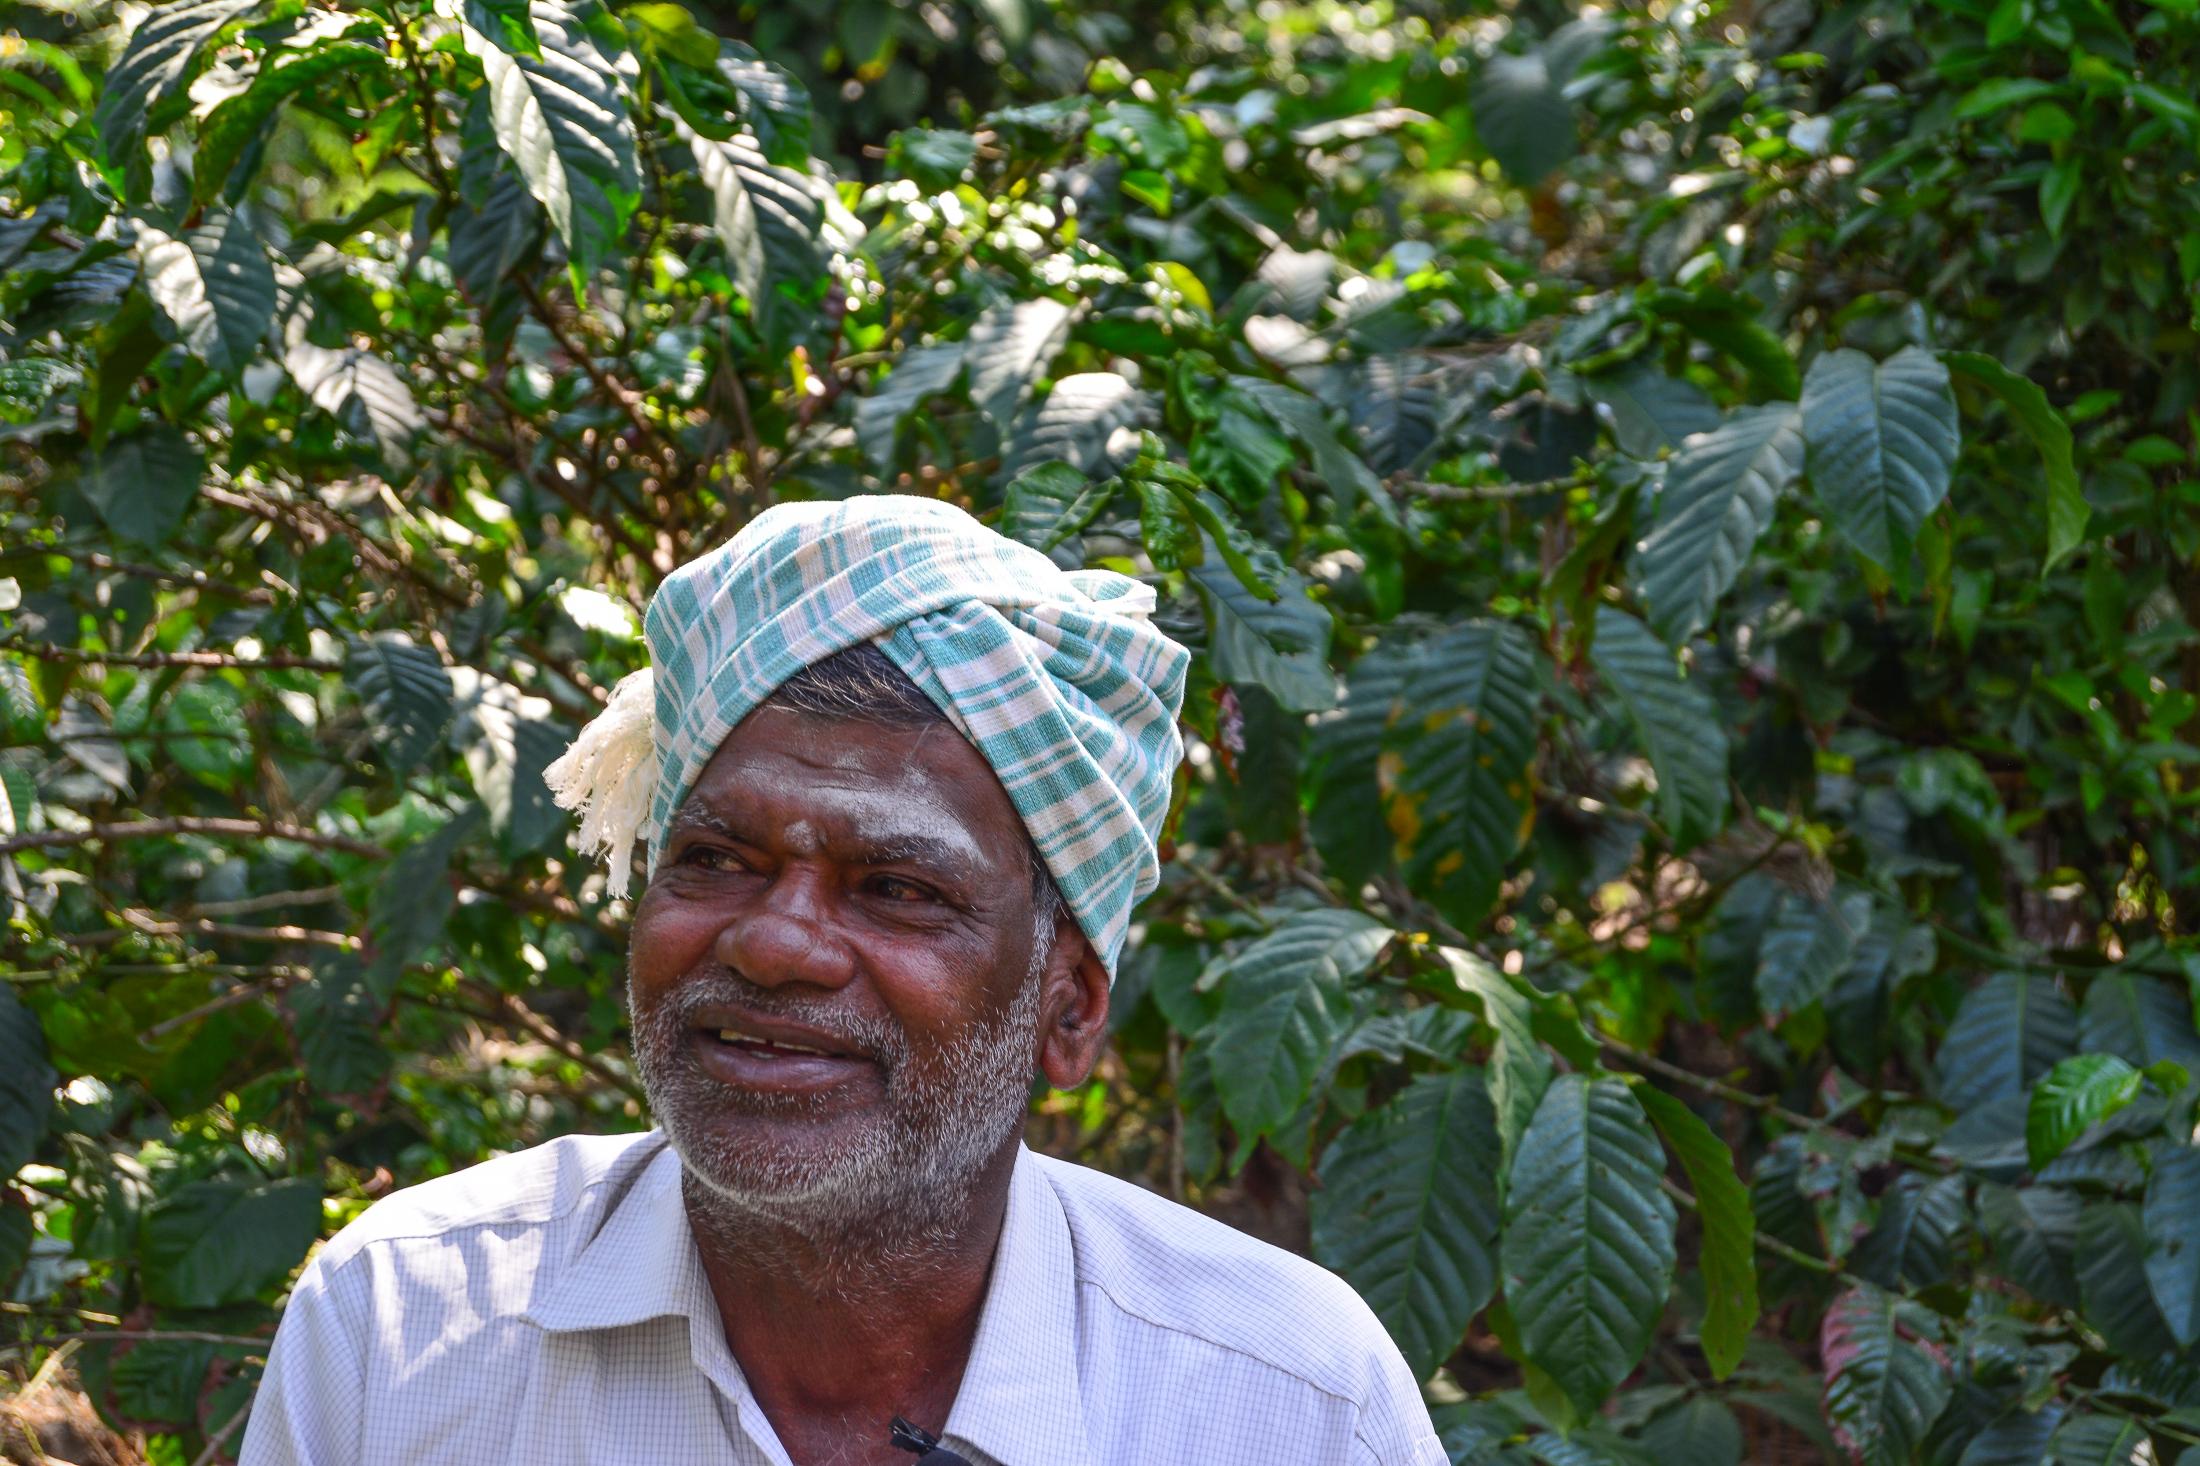 Chandrappa used to grow only ragi and maize until NABARD approached him and helped him by building bunds, trenches, providing him with training and planted silver oak trees. He now grows pepper, vegetables, coffee, banana, coconut and a large variety of fruits. 